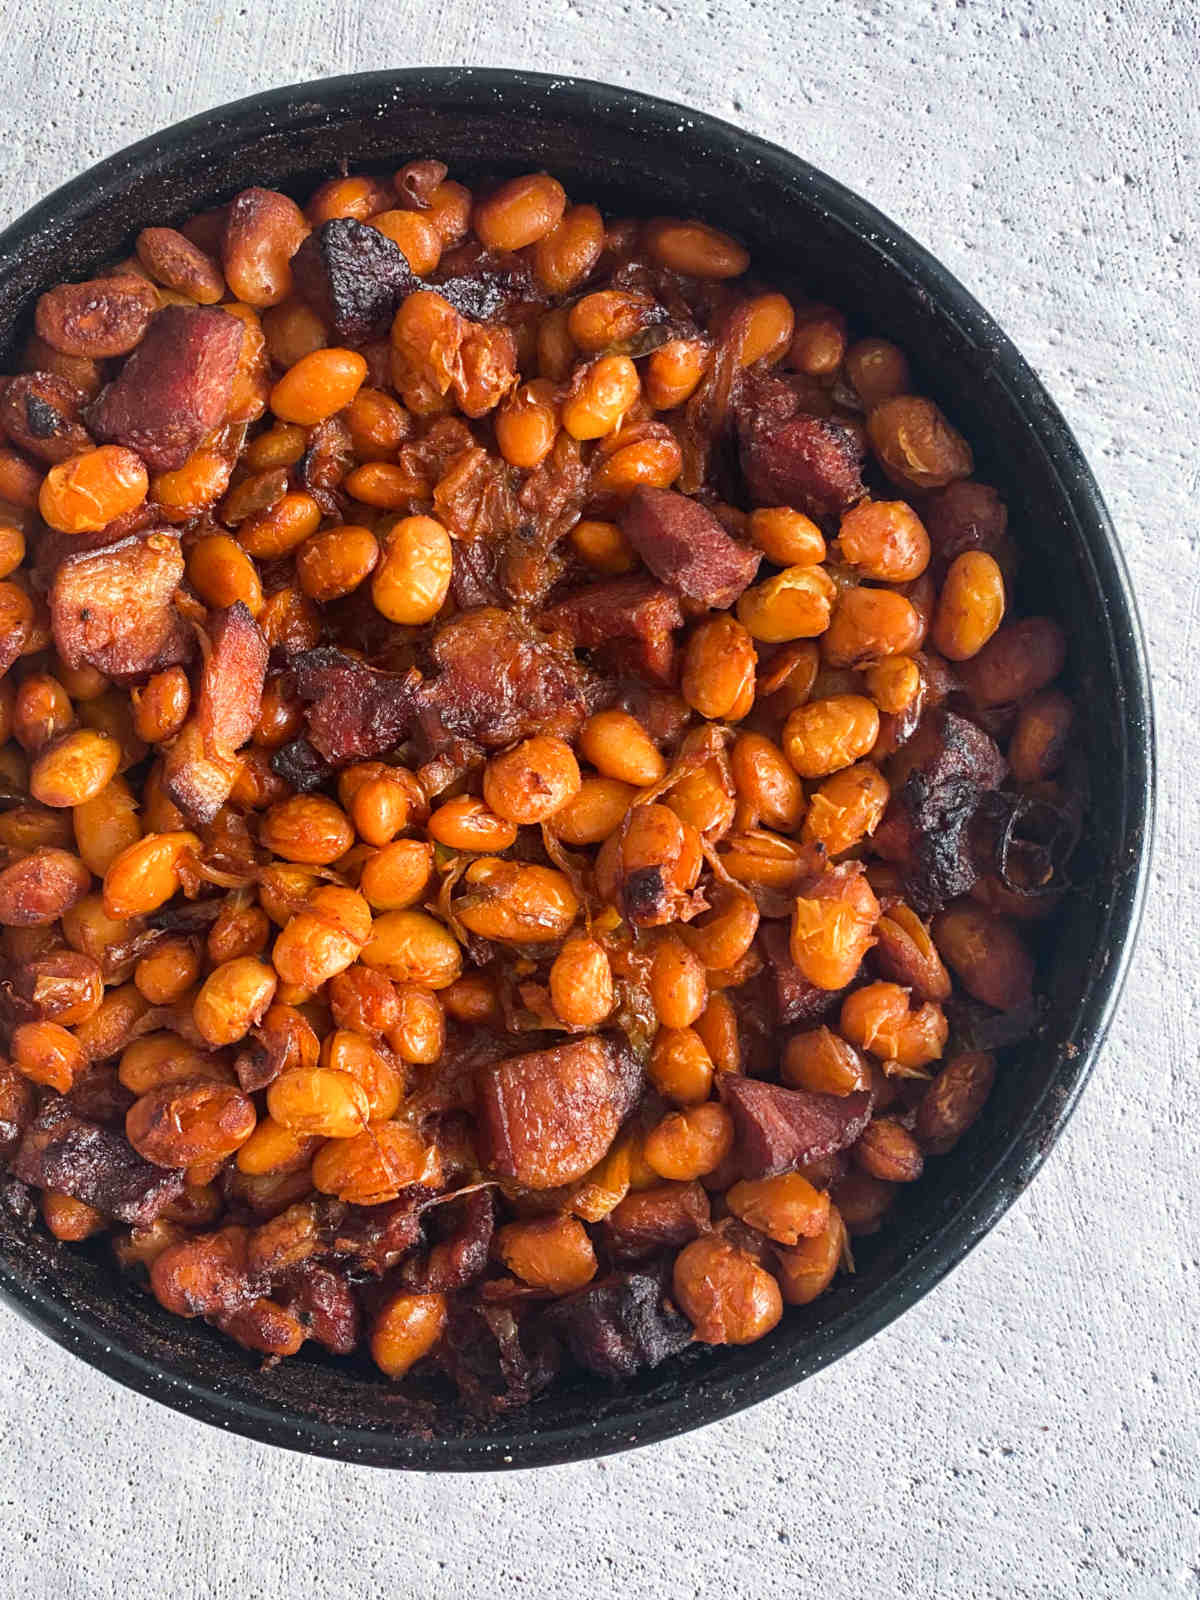 Baked beans in a black pan on a marble tabletop, overhead.